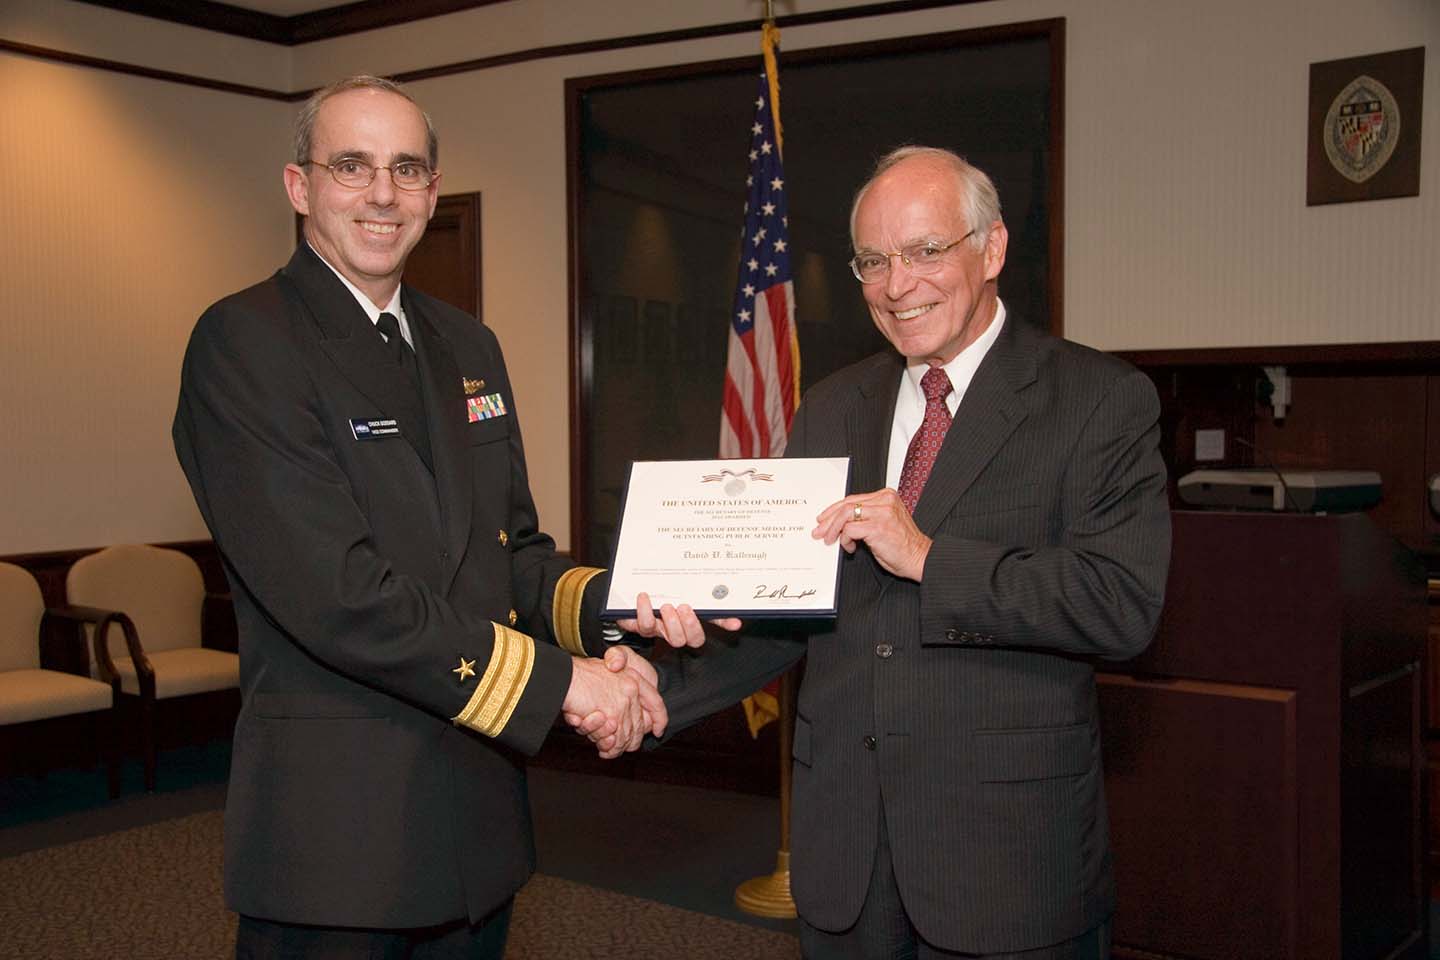 Rear Admiral "Chuck" Goddard presents the certificate for the Secretary of Defense Medal to Dave Kalbaugh